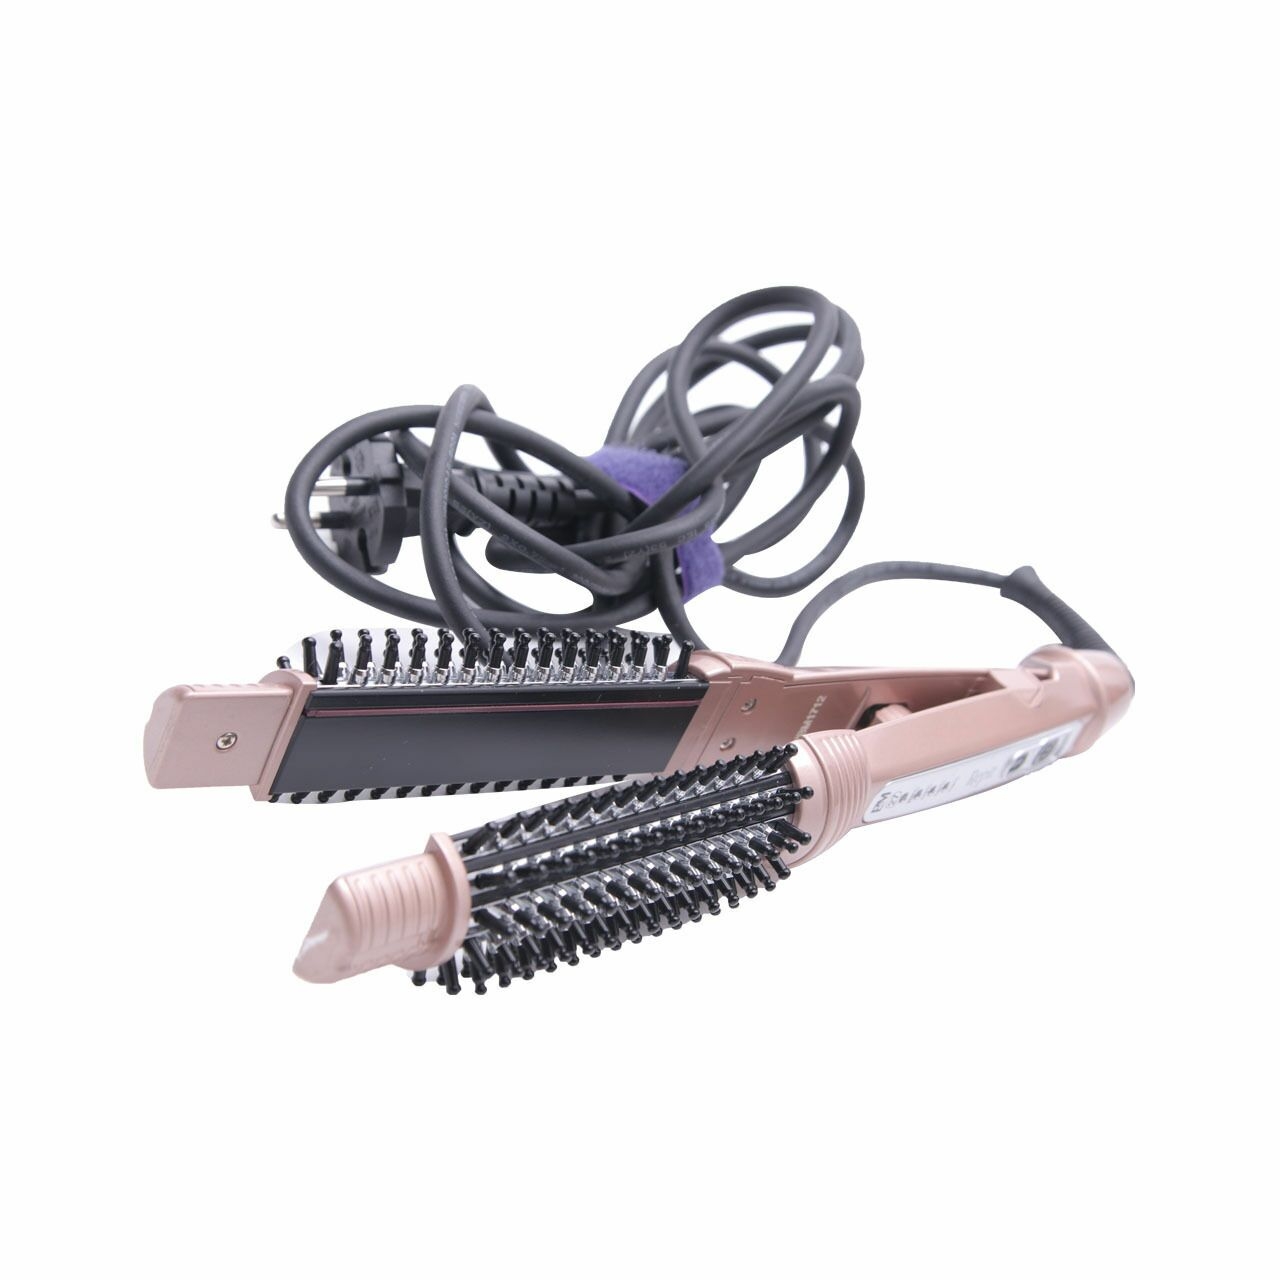 Repit Rose Gold 2 In 1 Heat Brush Iron